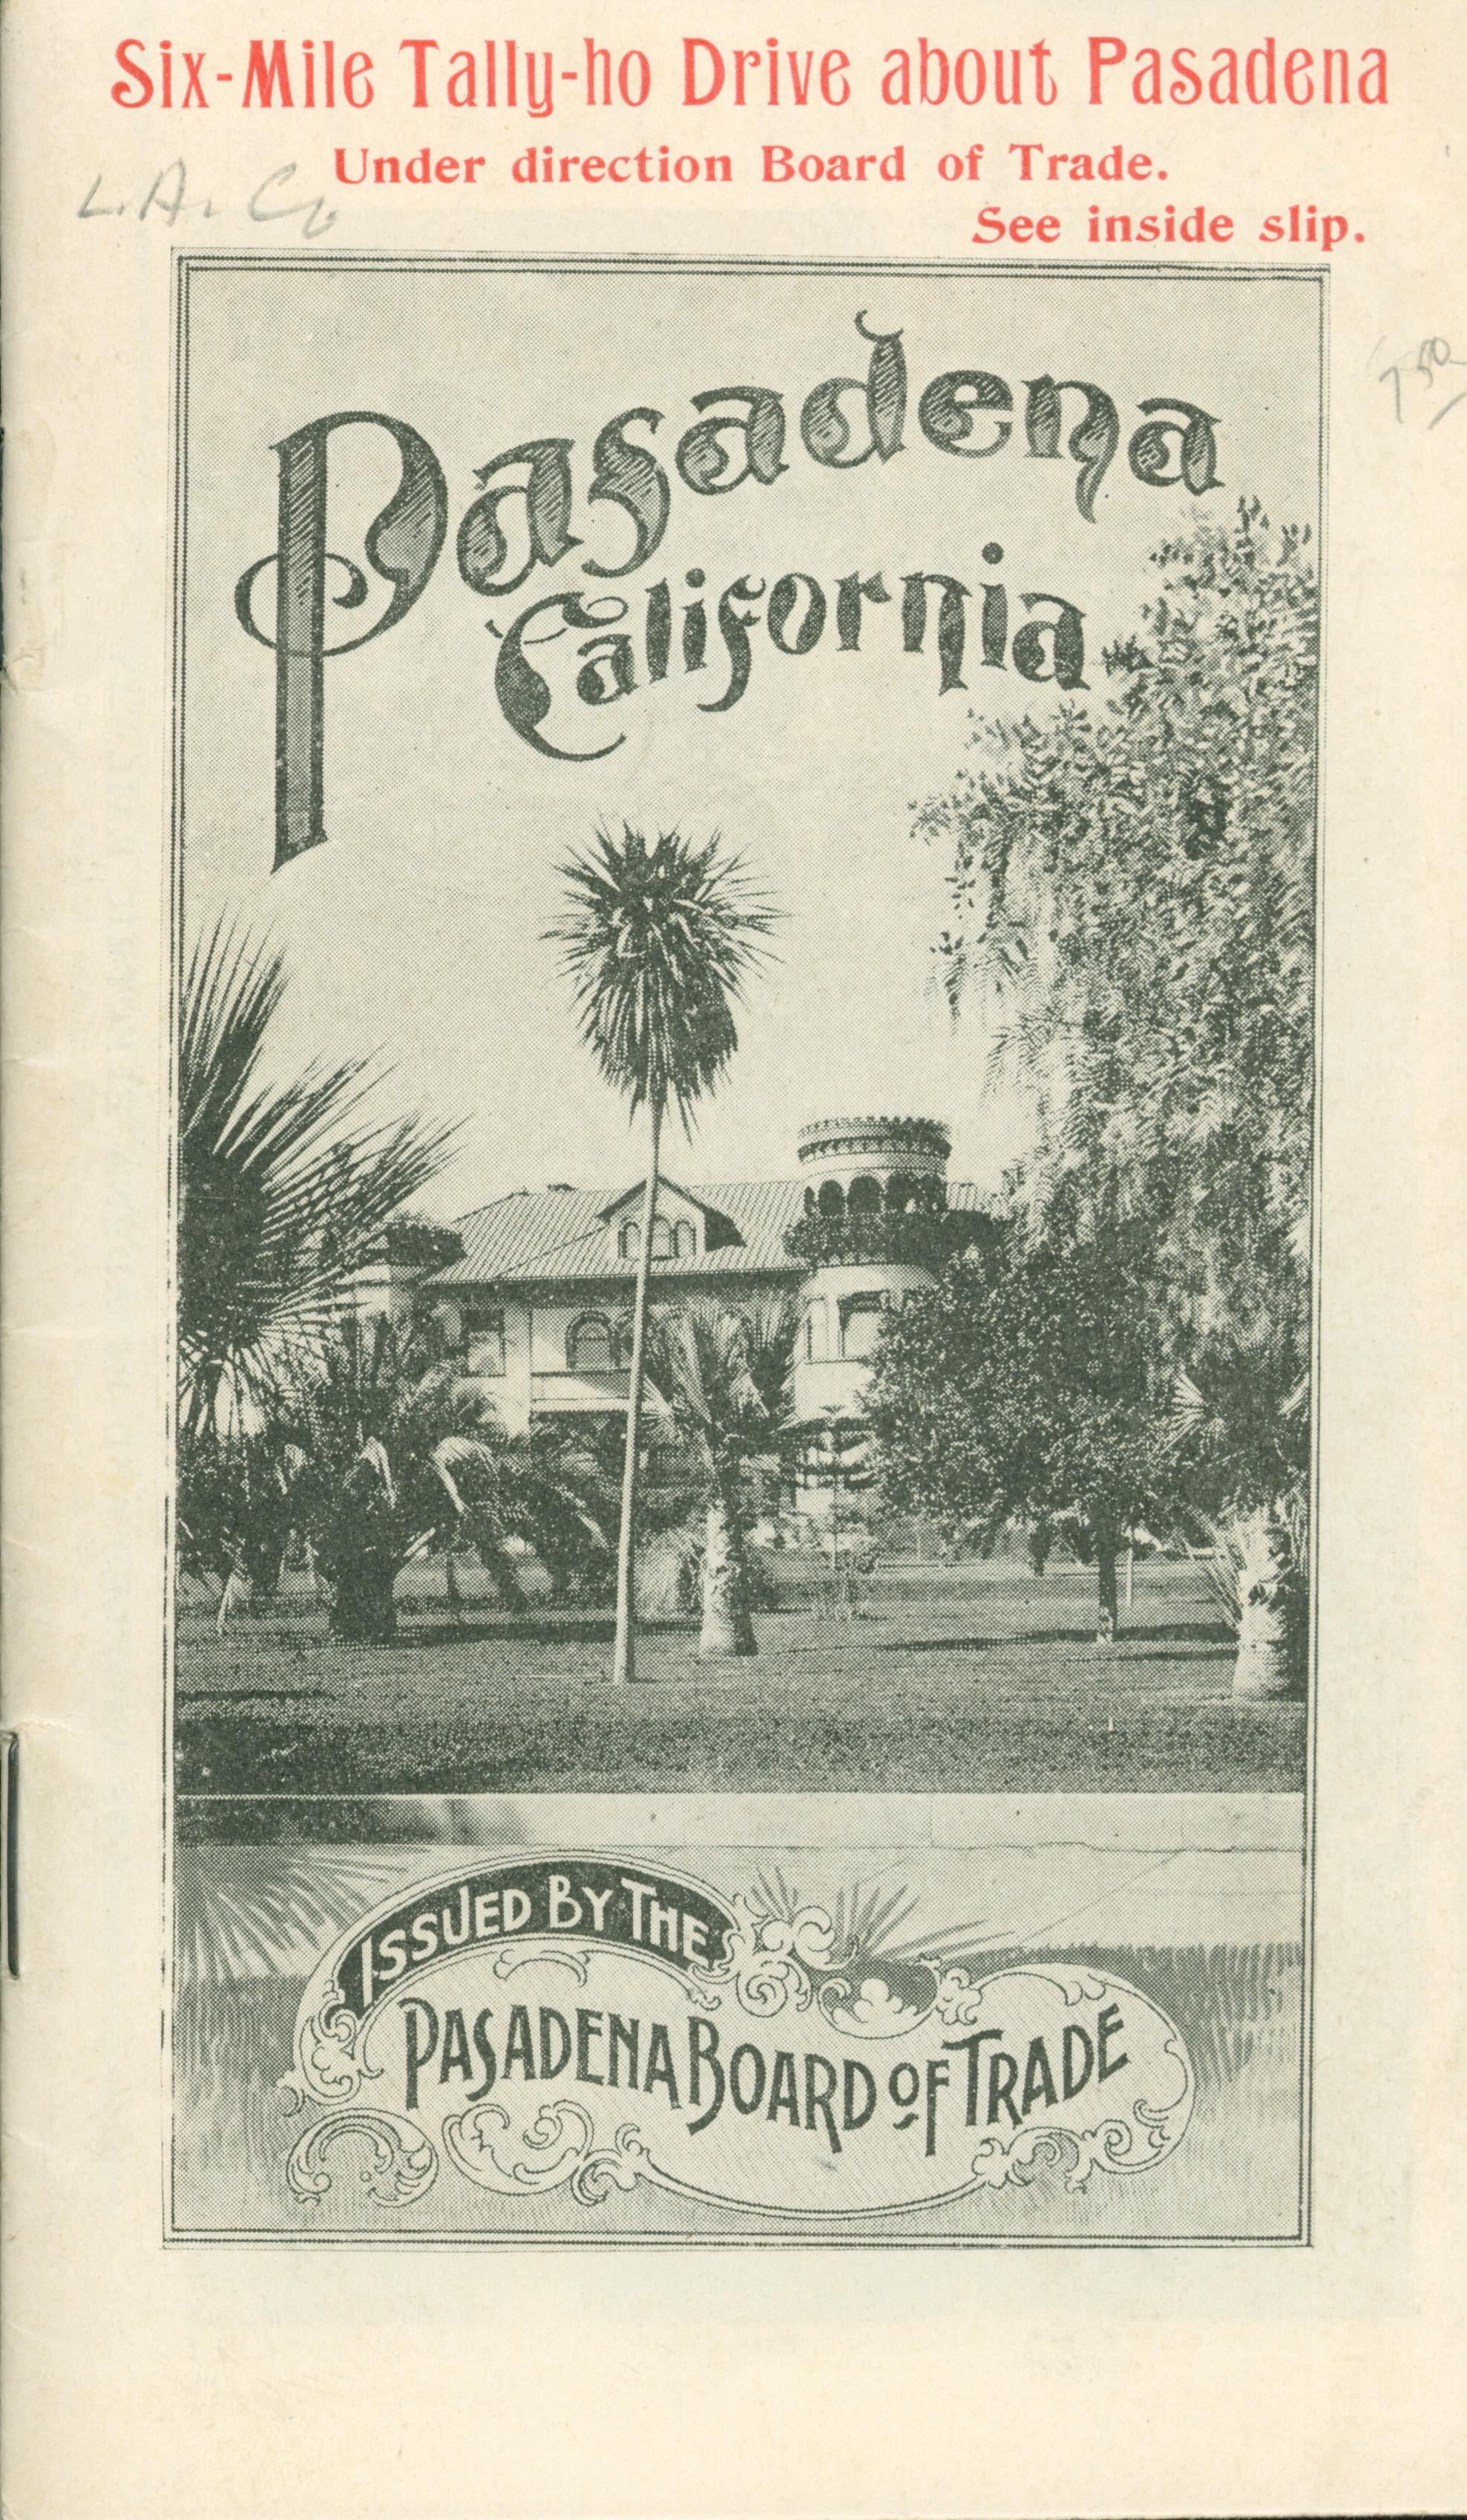 Front cover shows a large building, possibly a hotel, with grounds